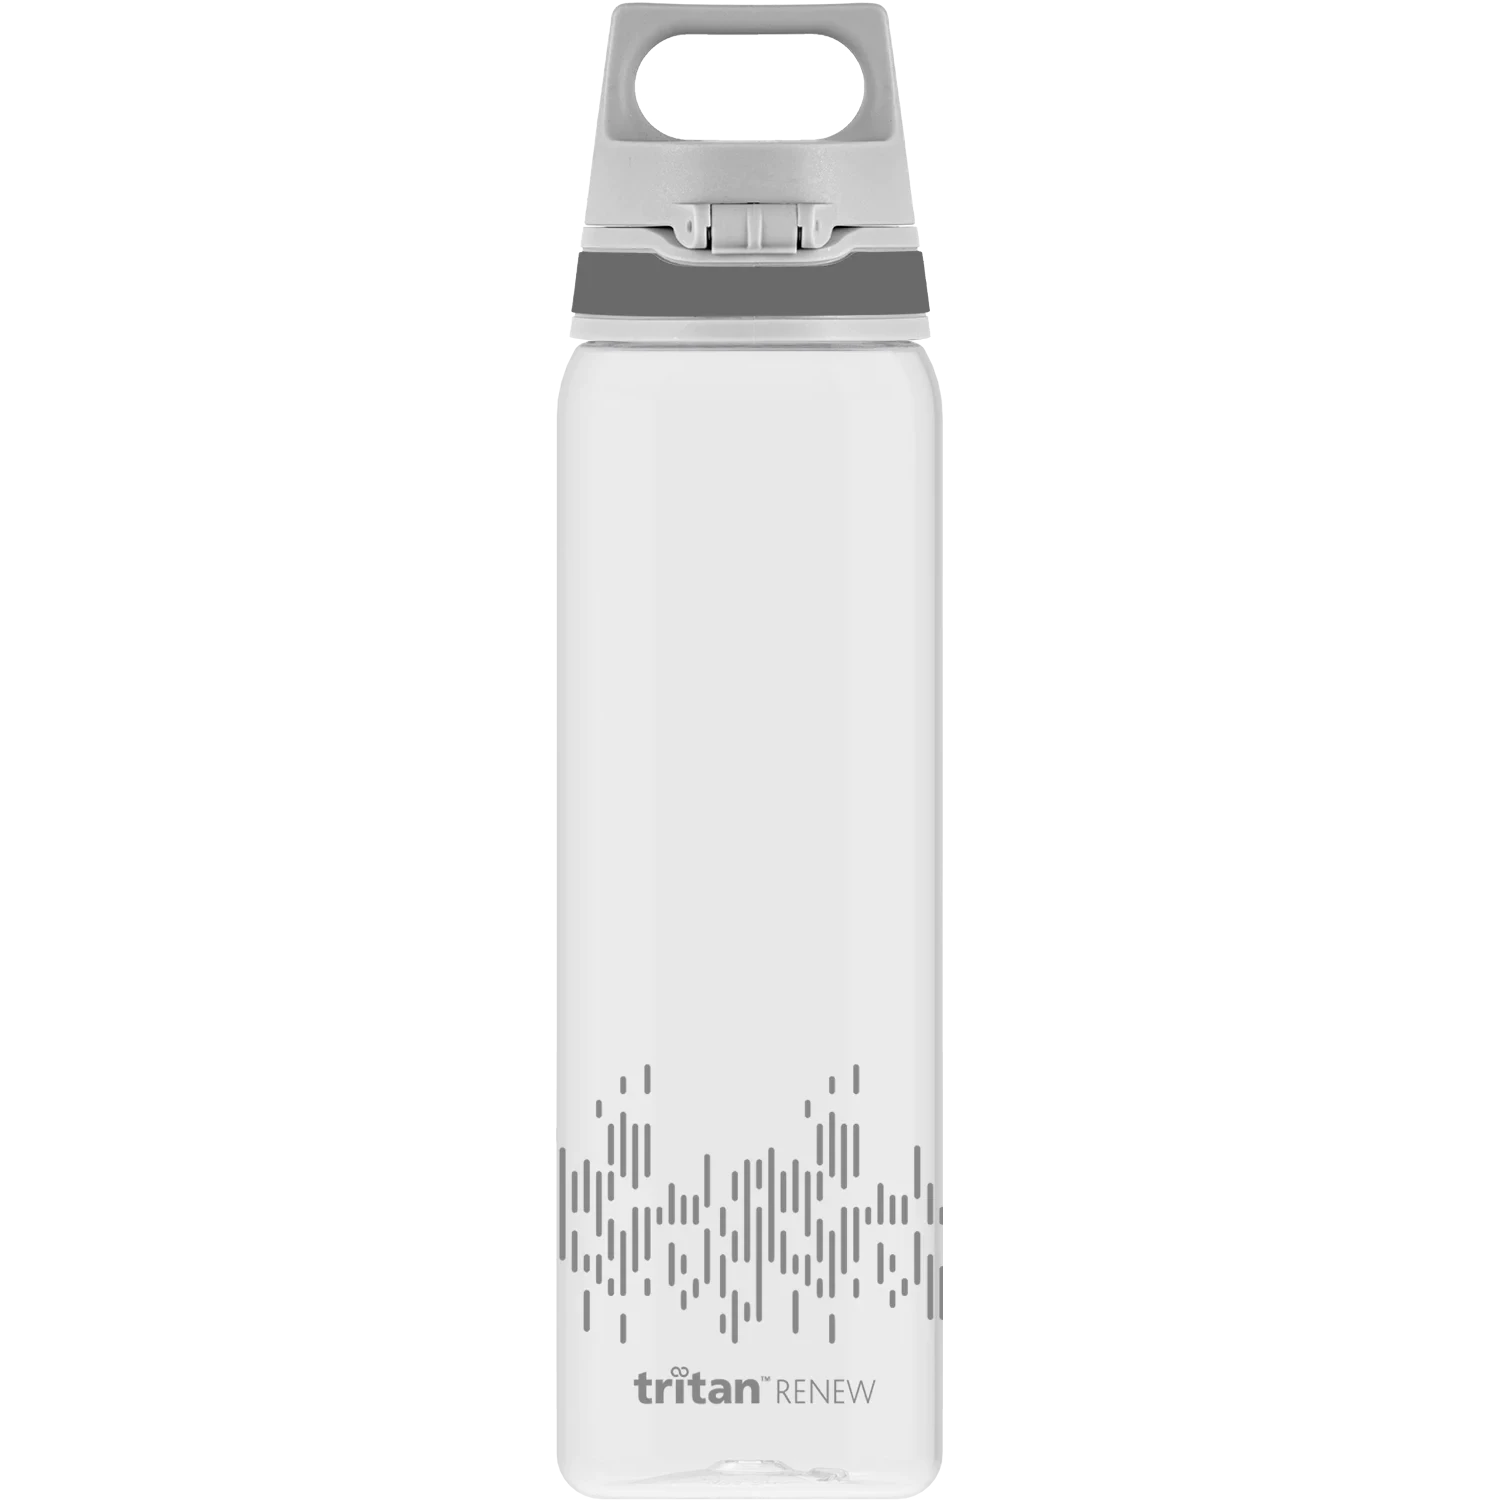 SIGG Total Clear ONE MyPlanet Bottle 0.75l - Tritan plastic Anthracite 0.75l Cutlery